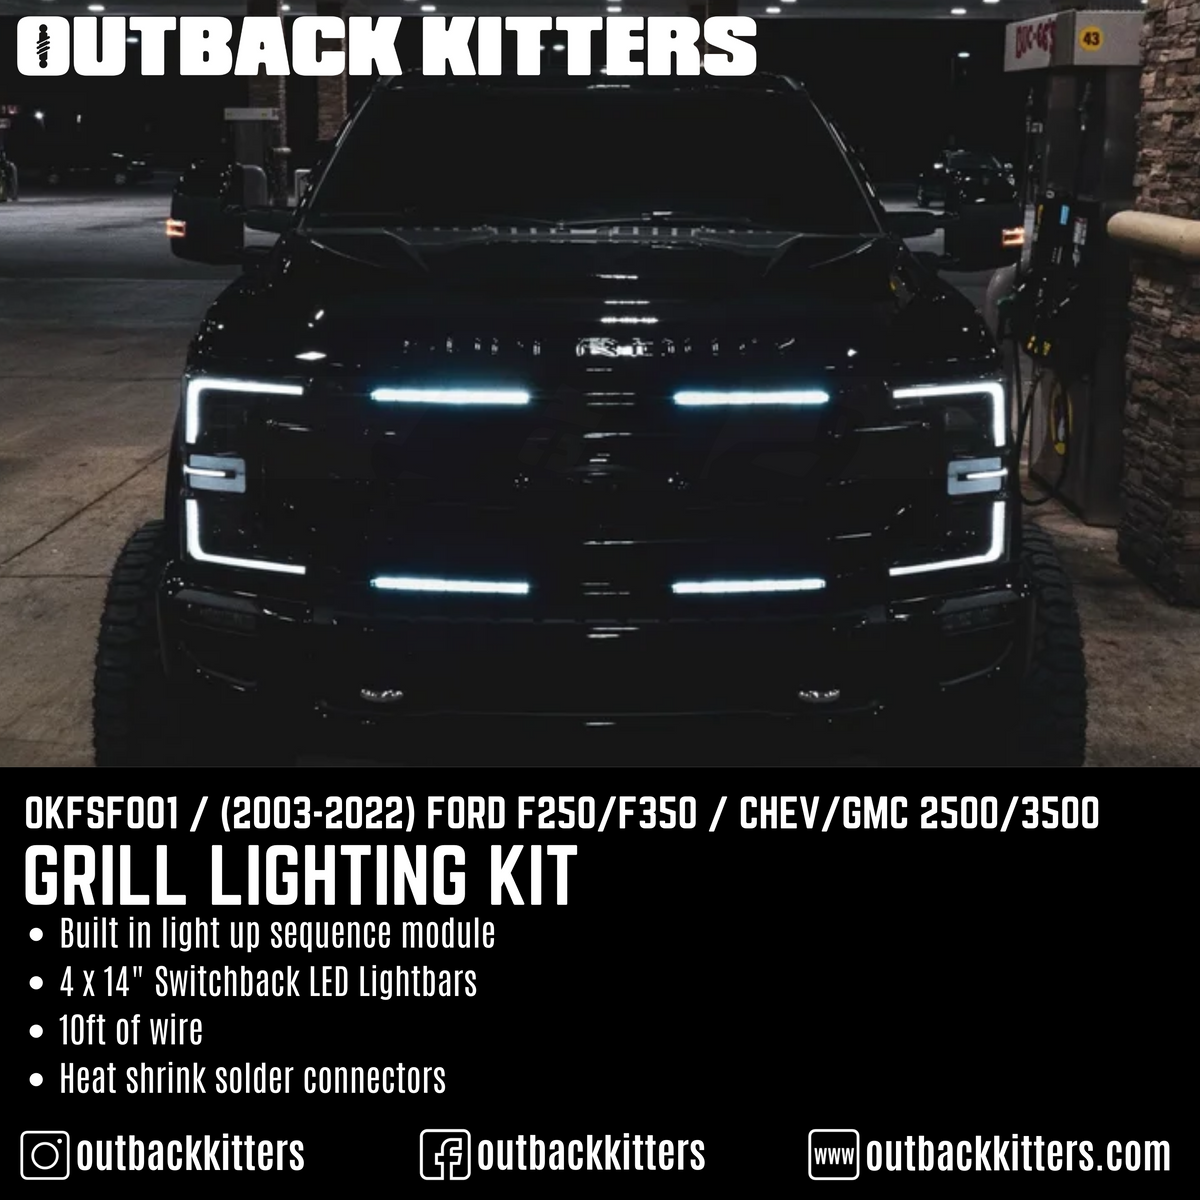 Grille Lighting Kit - 4 x 14" LEDs for Ford F250 / Chev 2500 / GMC 2500 - Outback Kitters